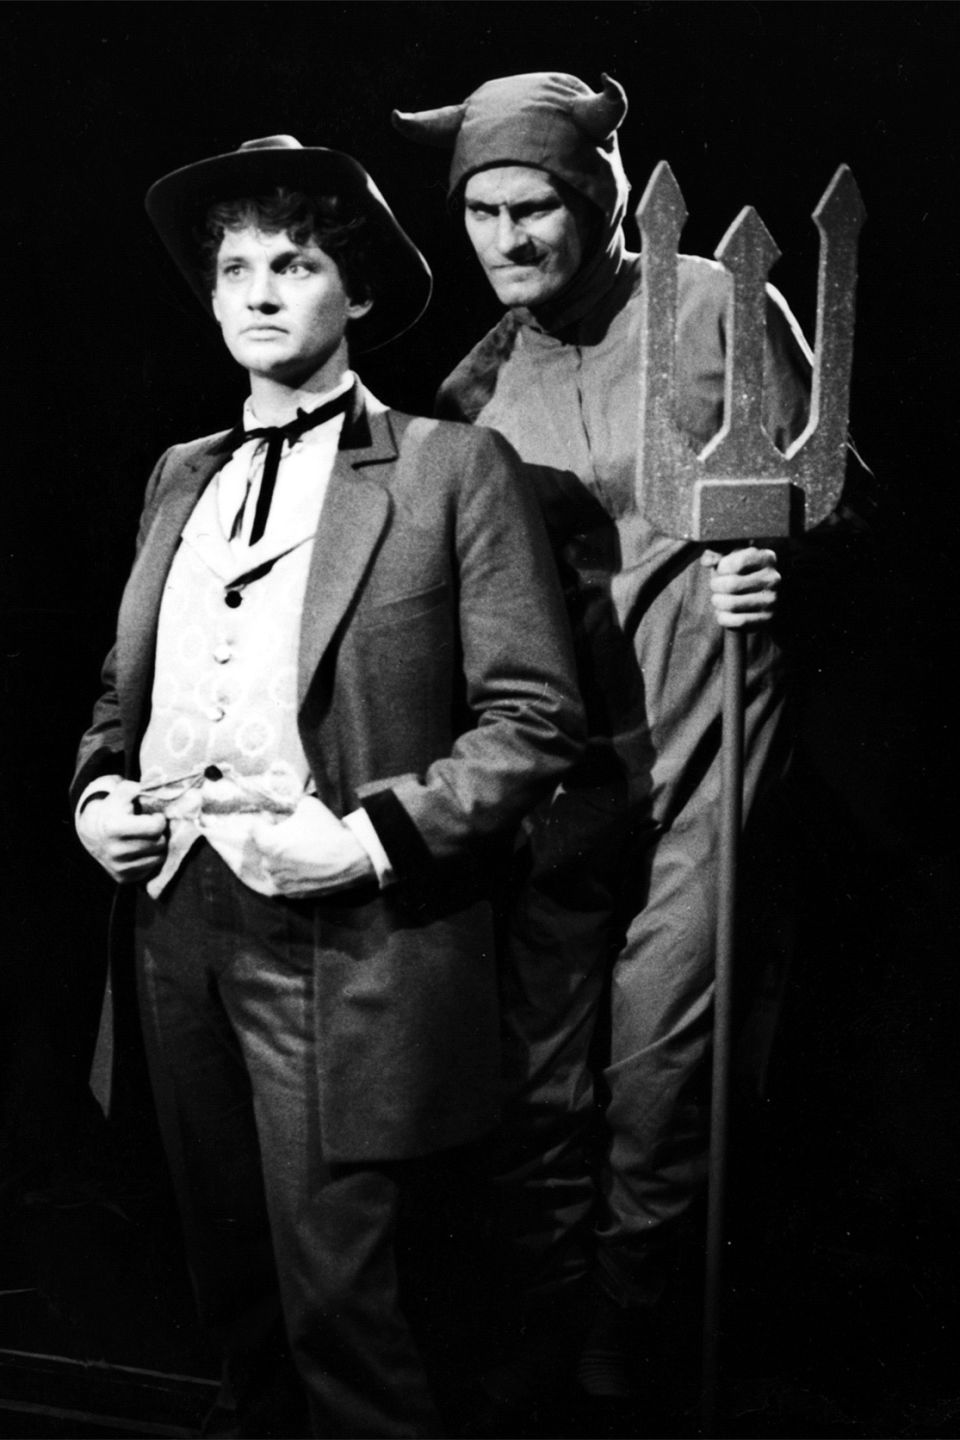 Anthony Phelan and Sean Mee in The Legend of King O'Malley by Michael Boddy and Bob Ellis, directed by Malcolm Blaylock, 1980.